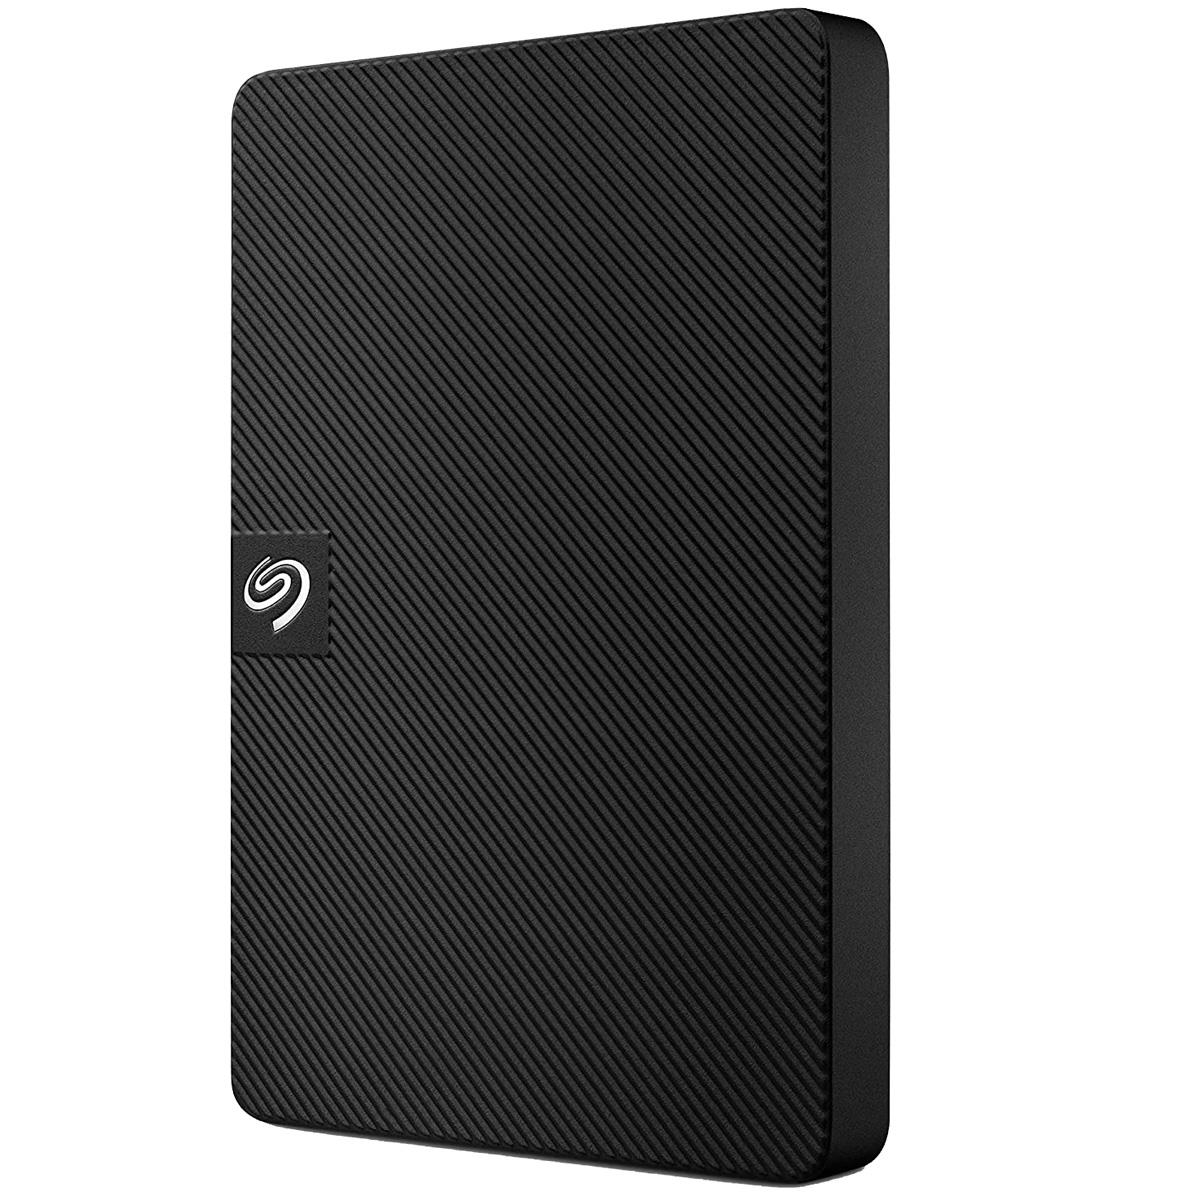 Image of Seagate Expansion 4TB USB 3.0 Portable External Hard Drive